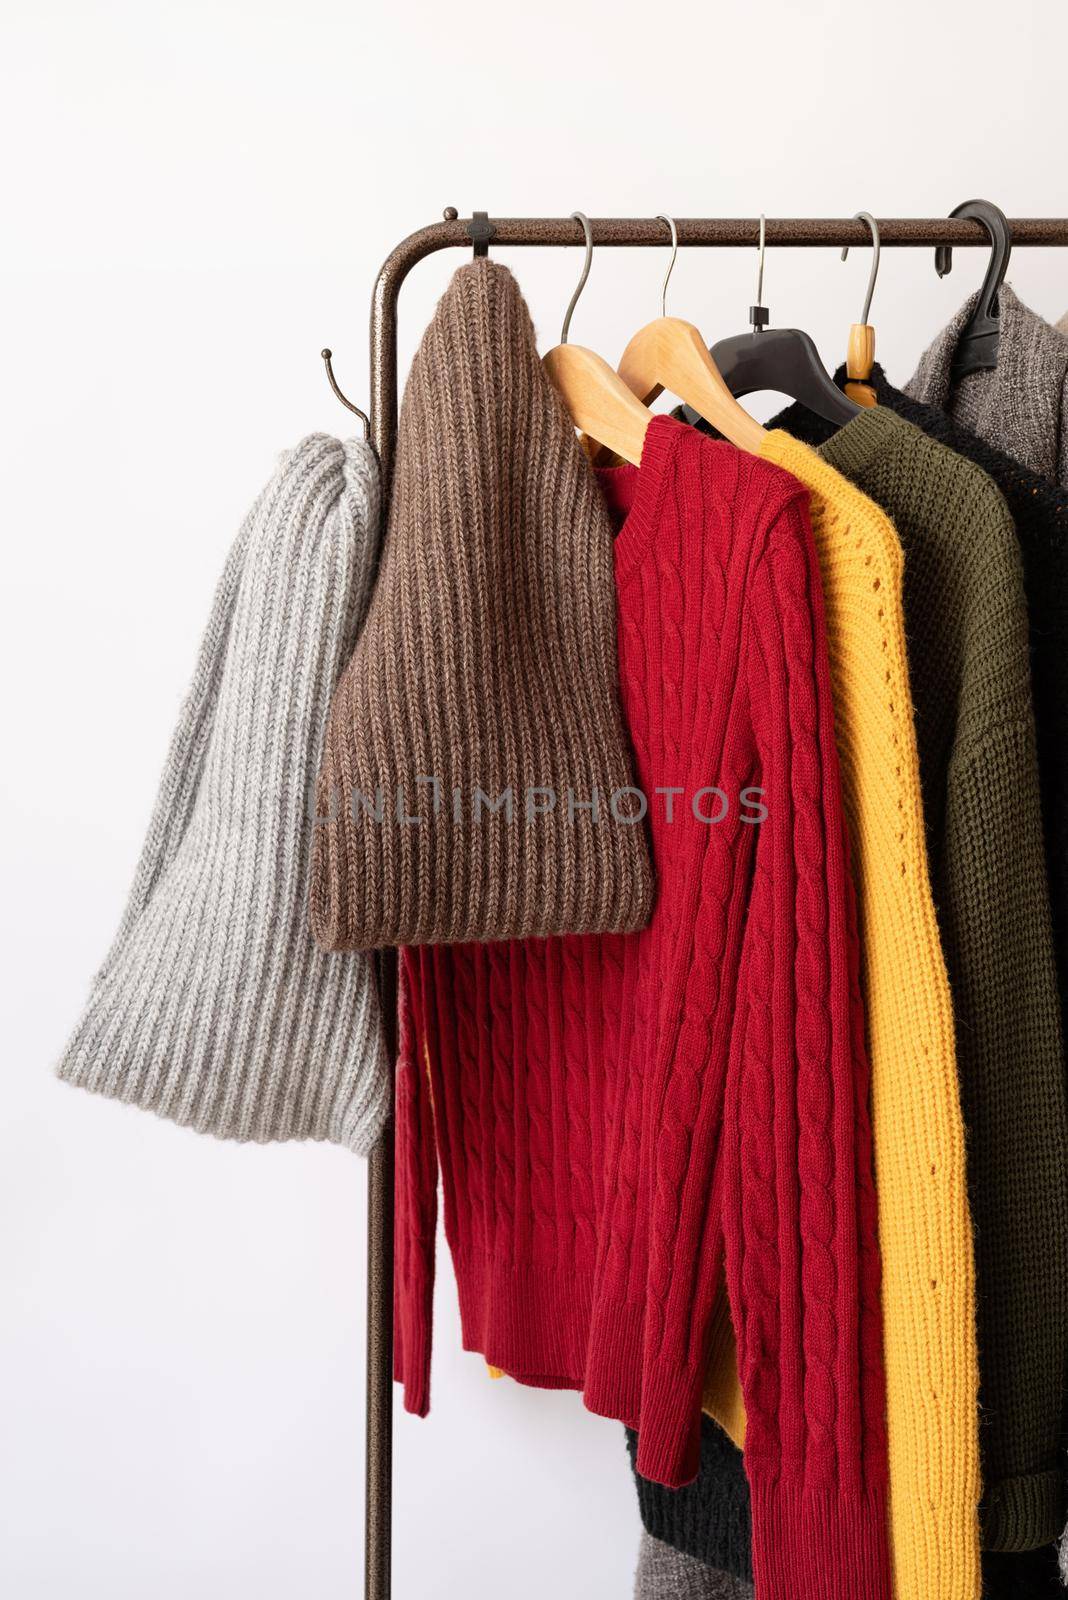 Row of different colorful Knitted sweaters hang on hangers, white background by Desperada